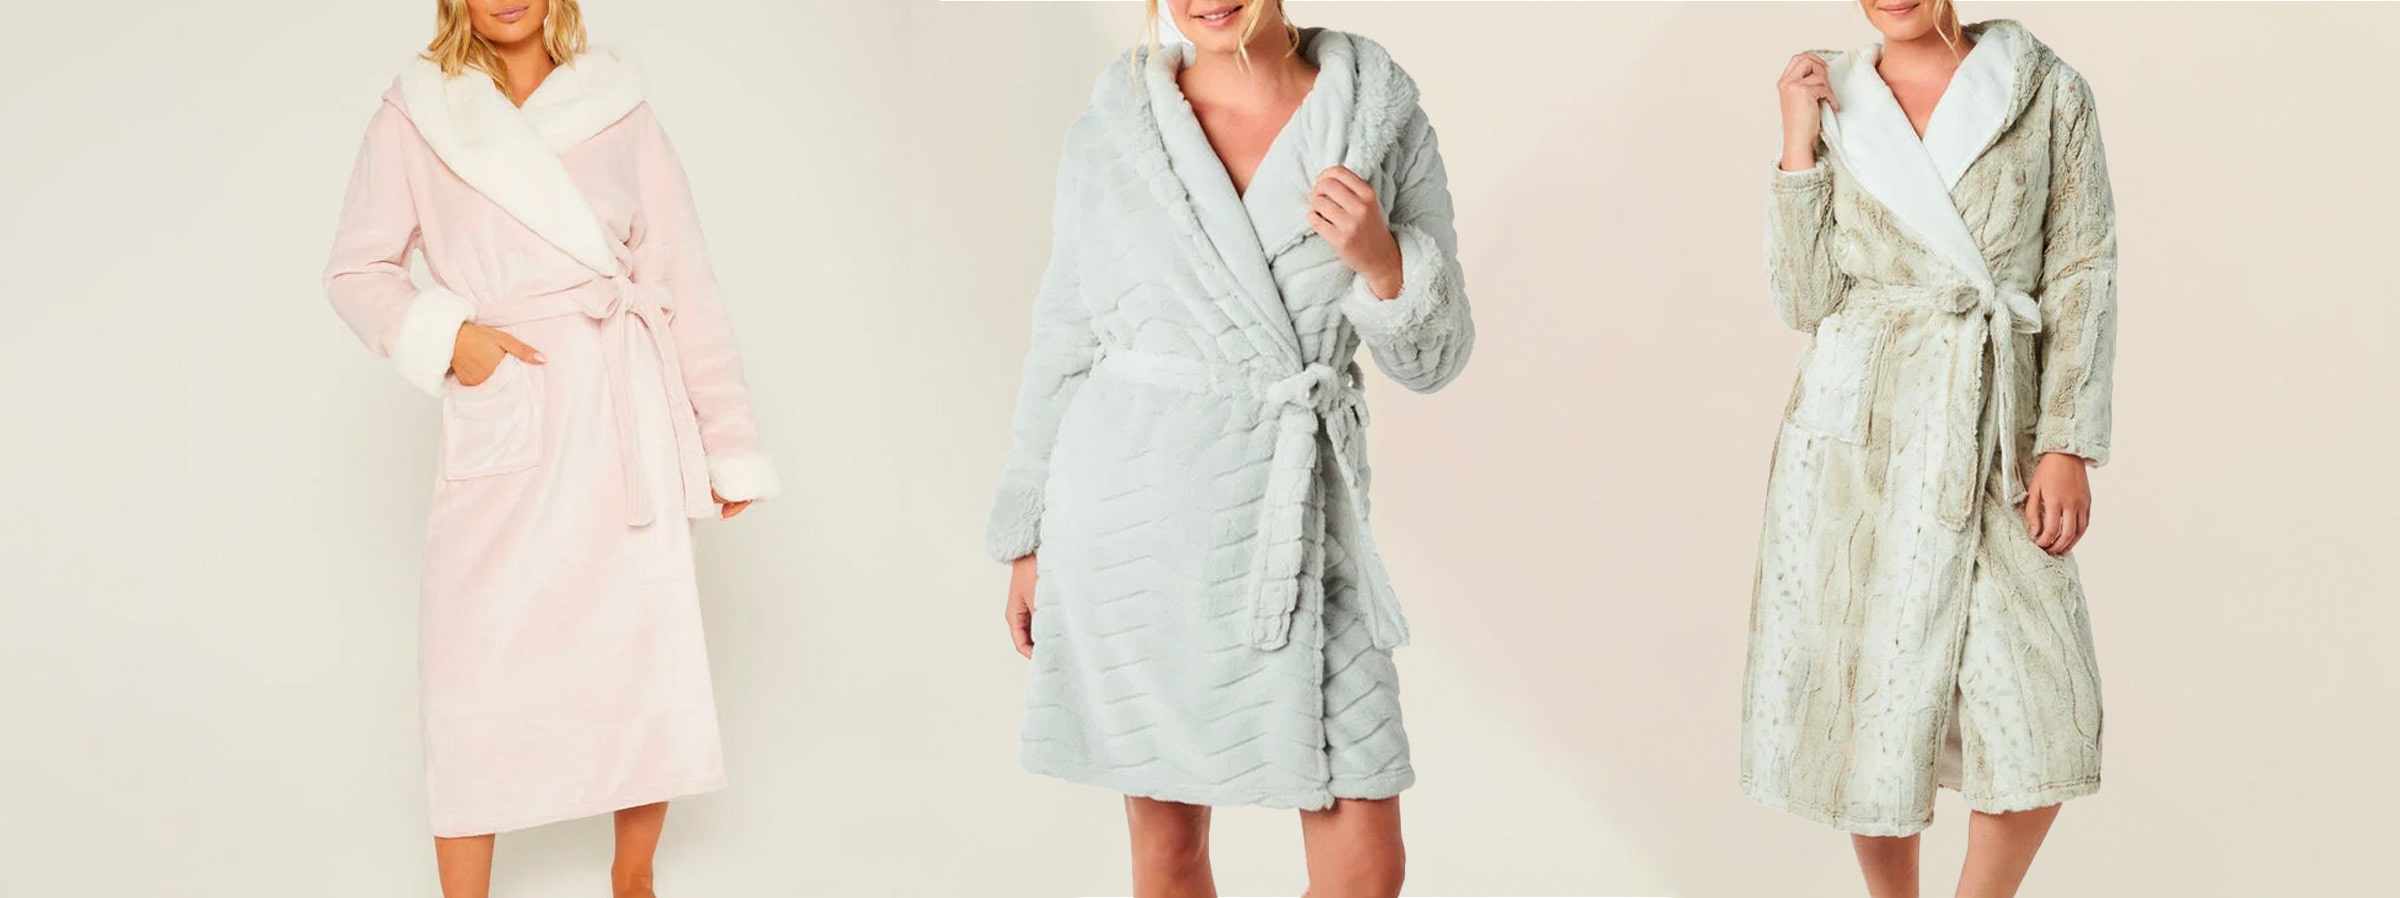 https://www.bouxavenue.com/on/demandware.static/-/Sites-bouxavenue-global-Library/default/dw403fd110/01_BOUX_AVE_000_Dressing_Gown_header-min.jpg